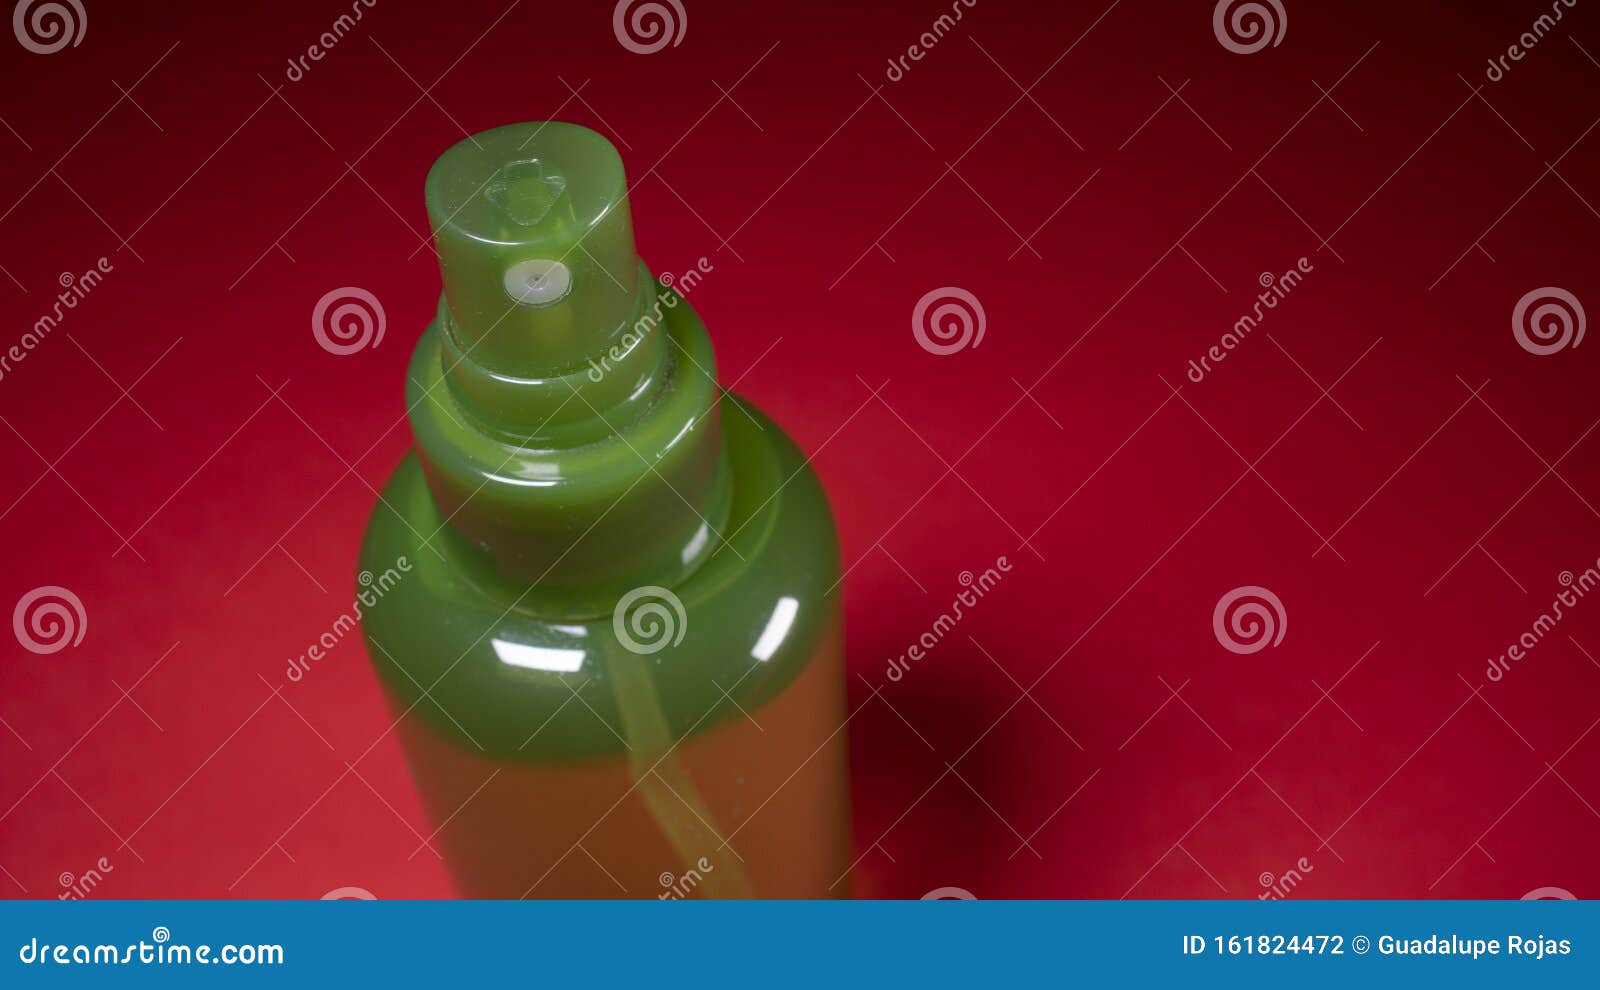 plastic bottle filled with red background